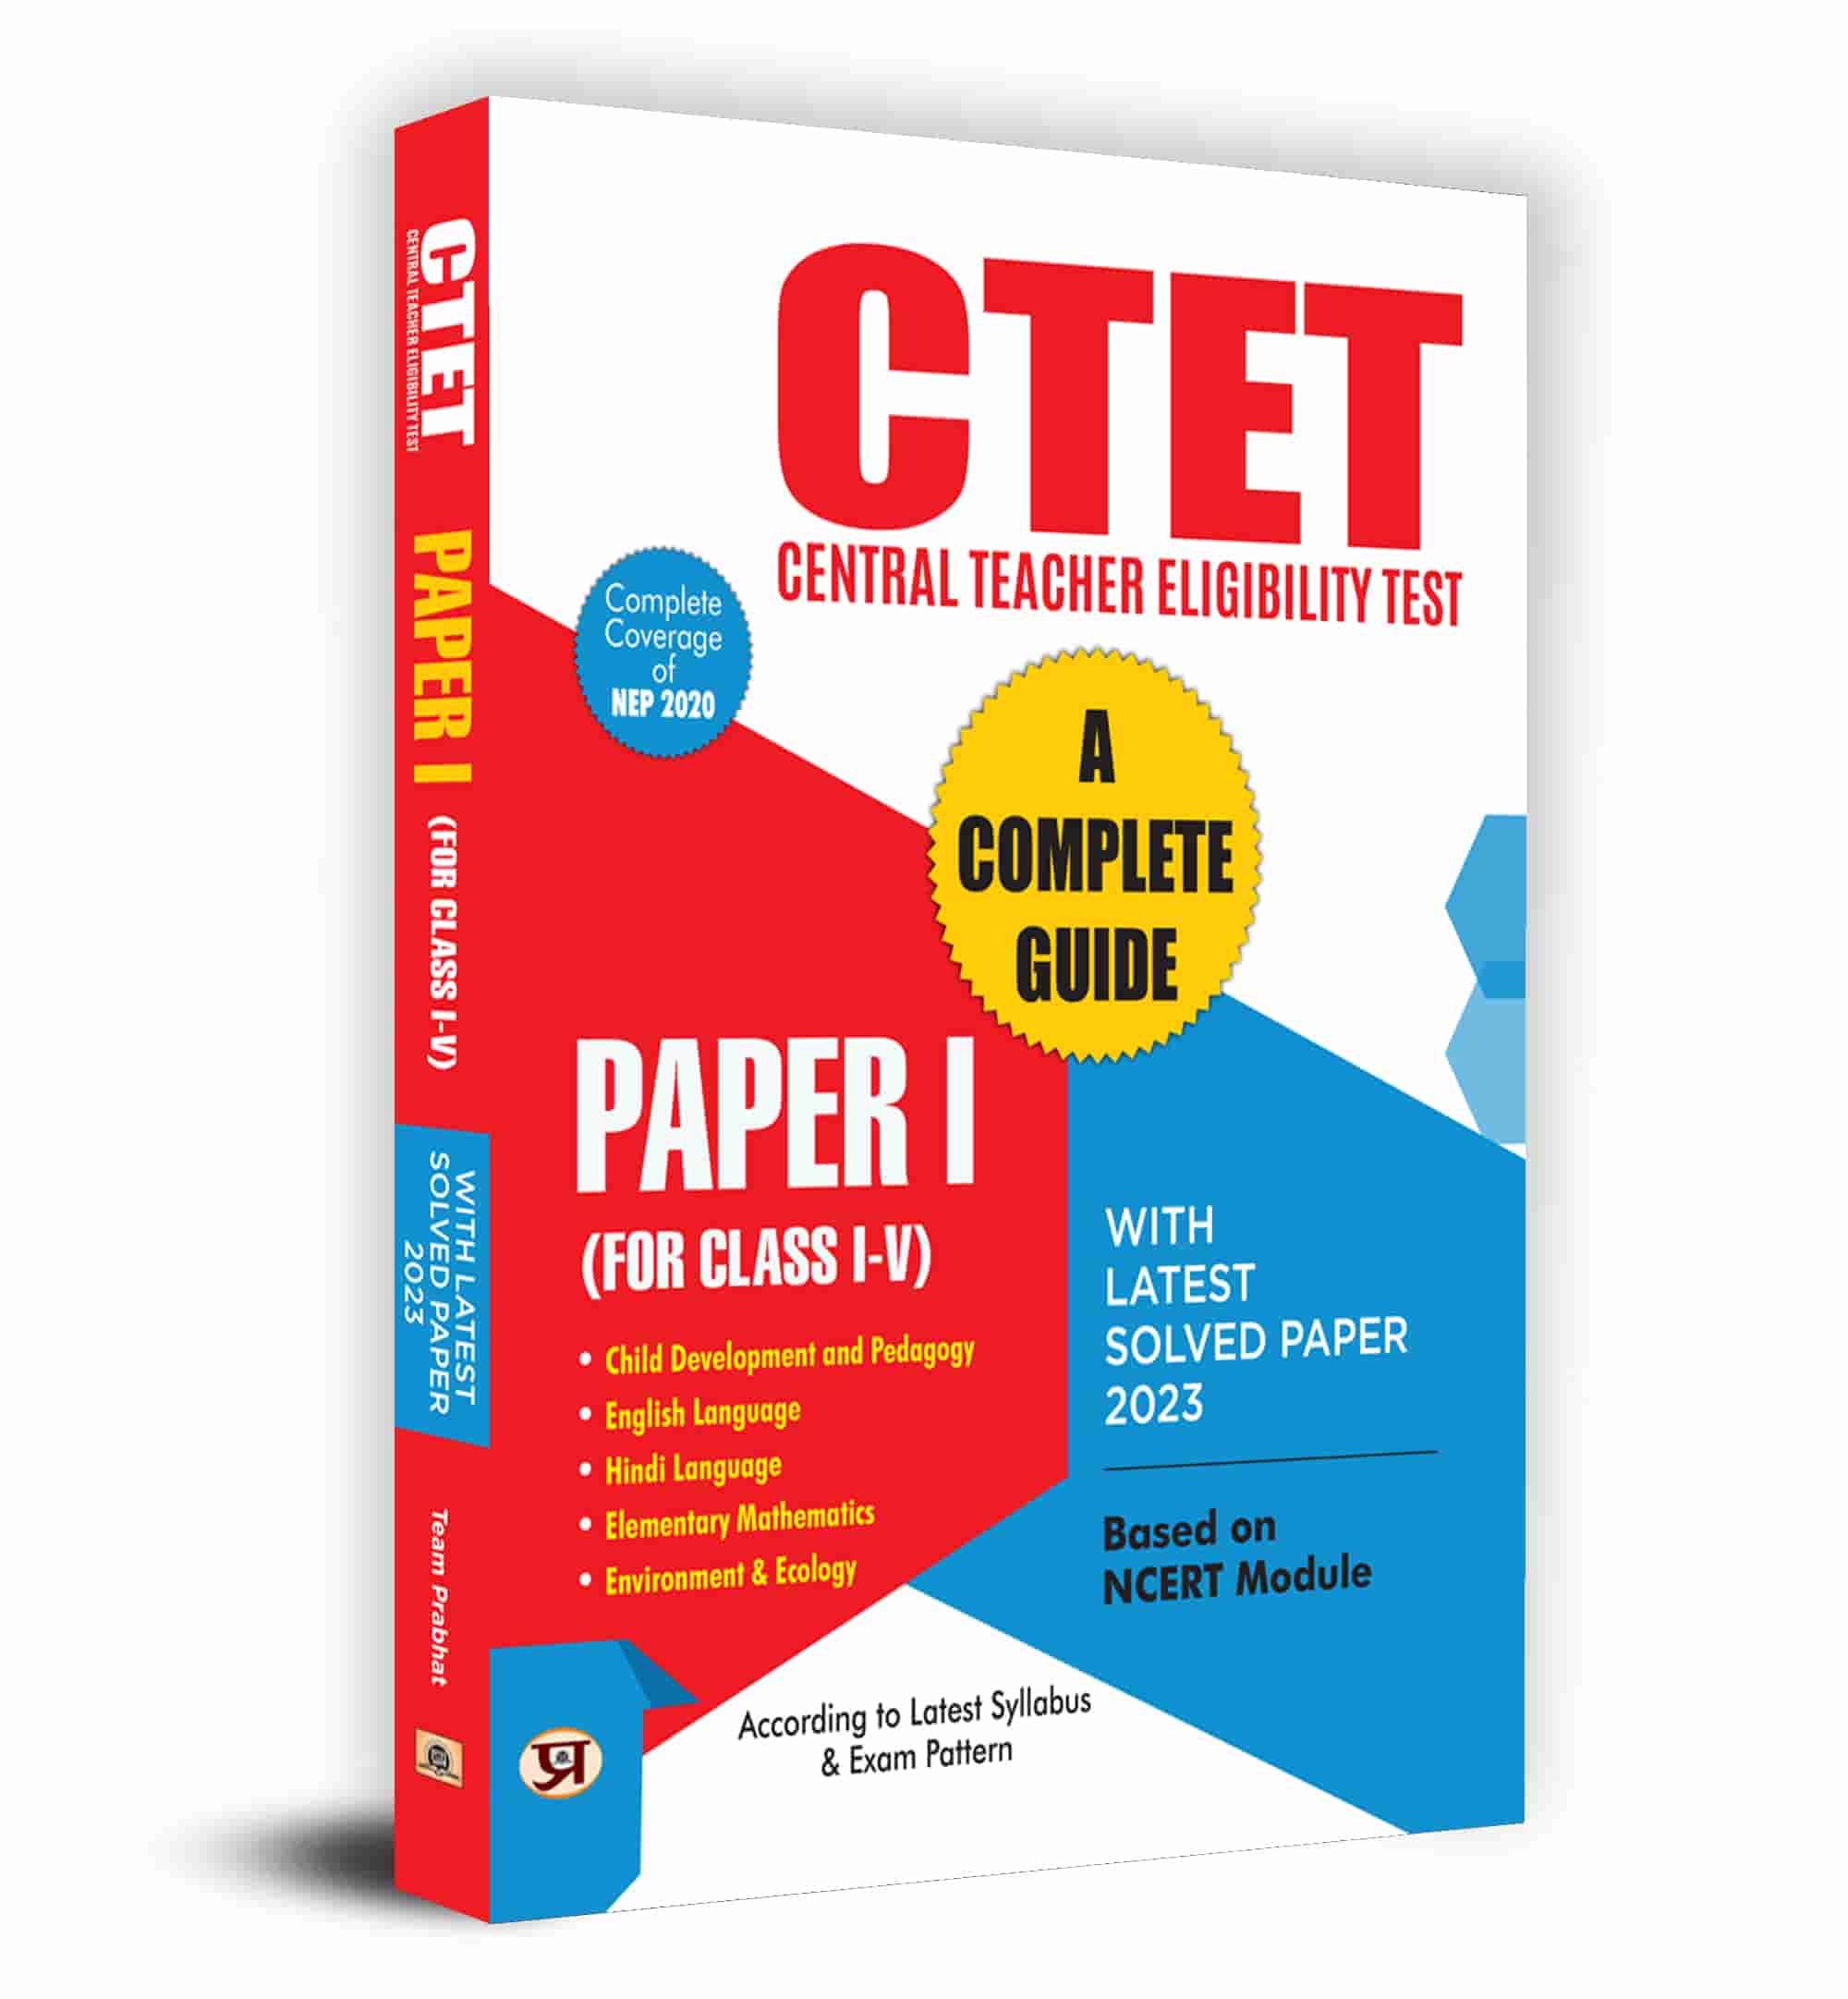 CTET Central Teacher Eligibility Test A Complete Guide Paper-1 (For Cl...